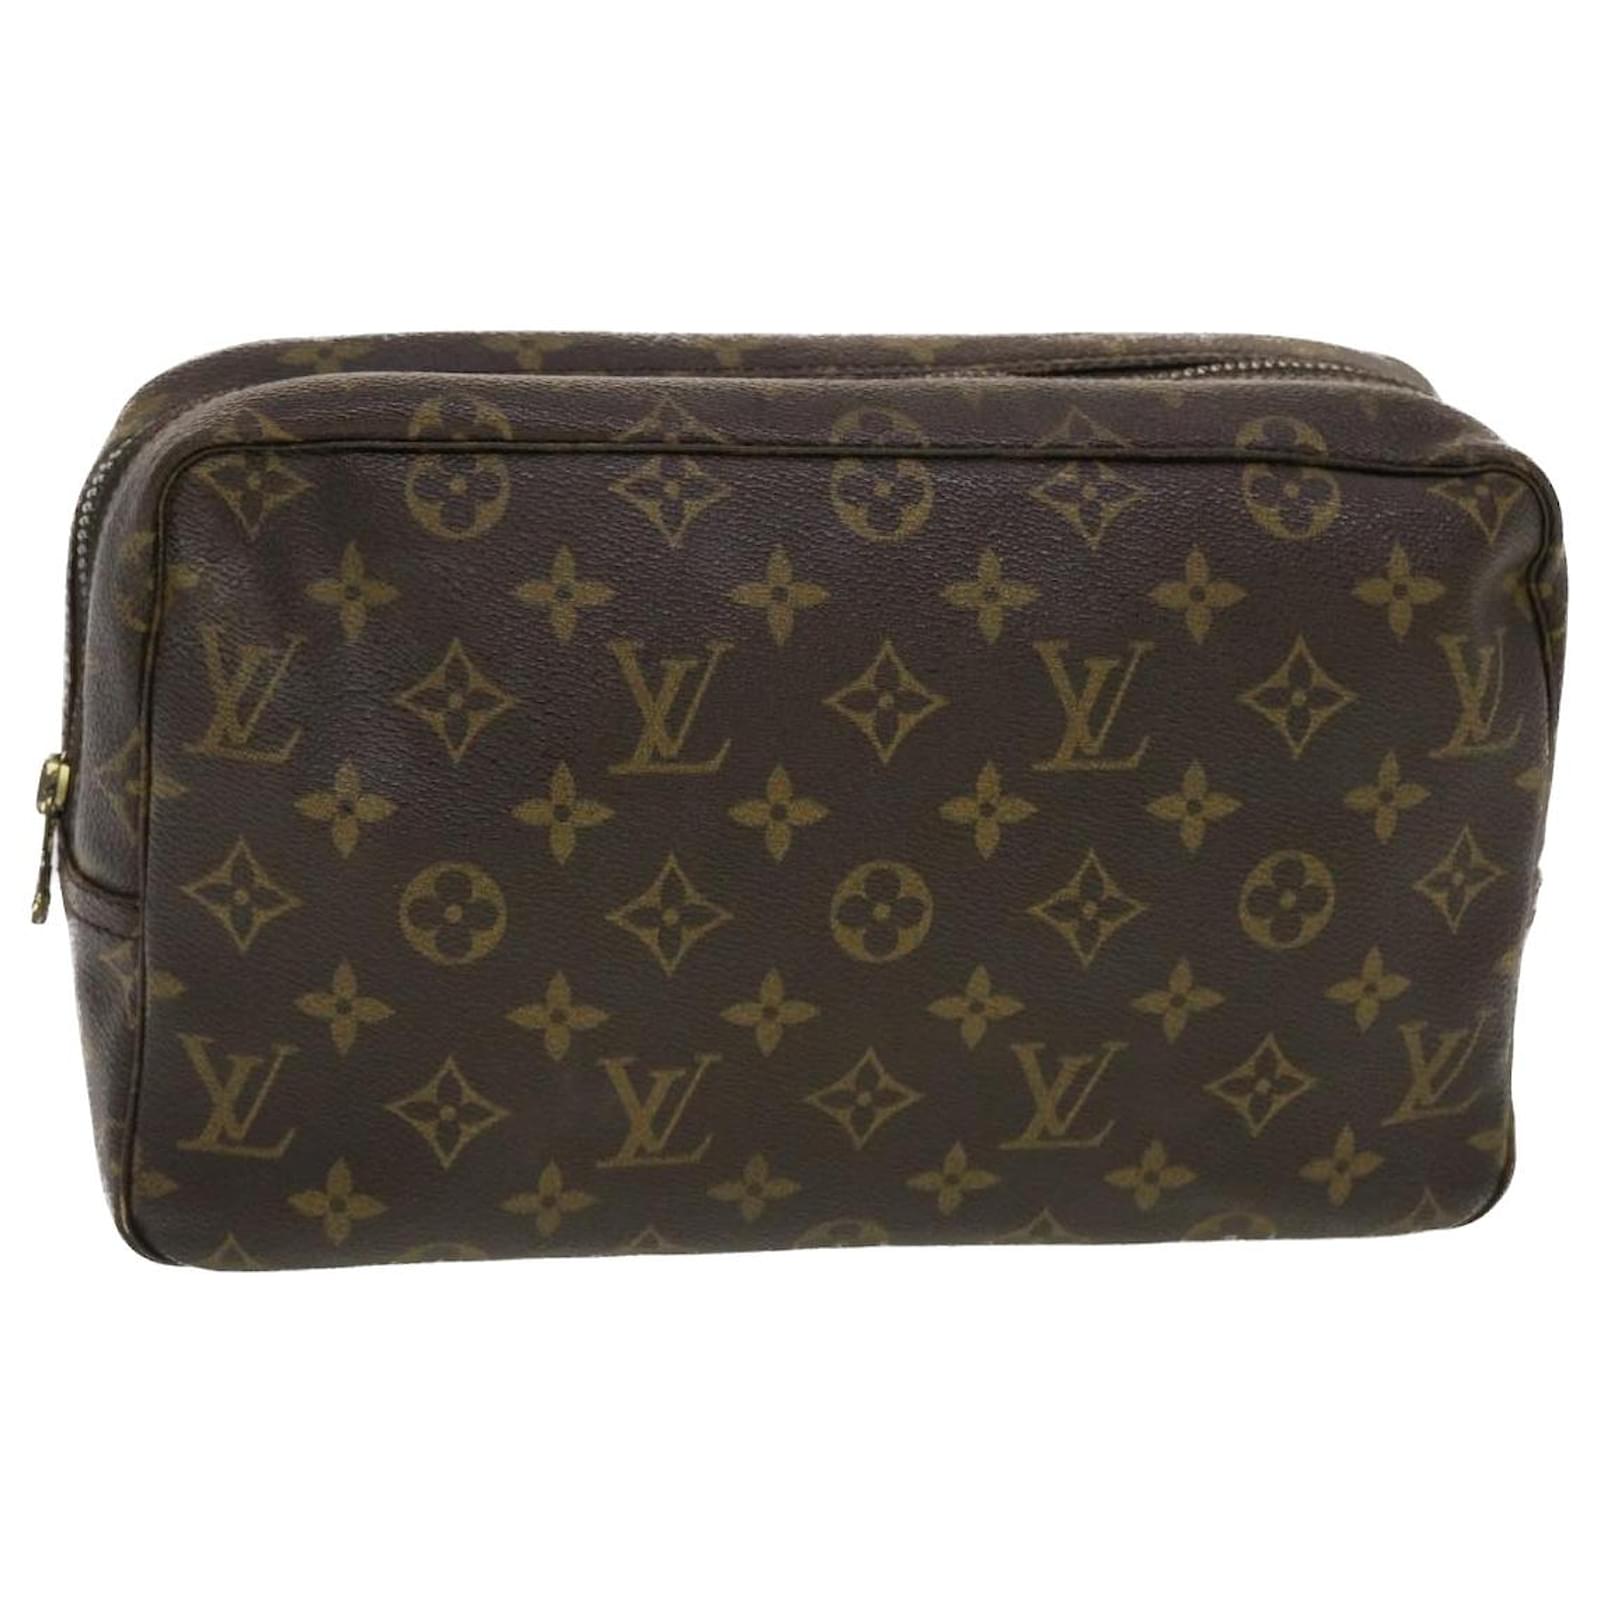 Used louis vuitton TROUSSE 28 HANDBAGS HANDBAGS / SMALL - LEATHER